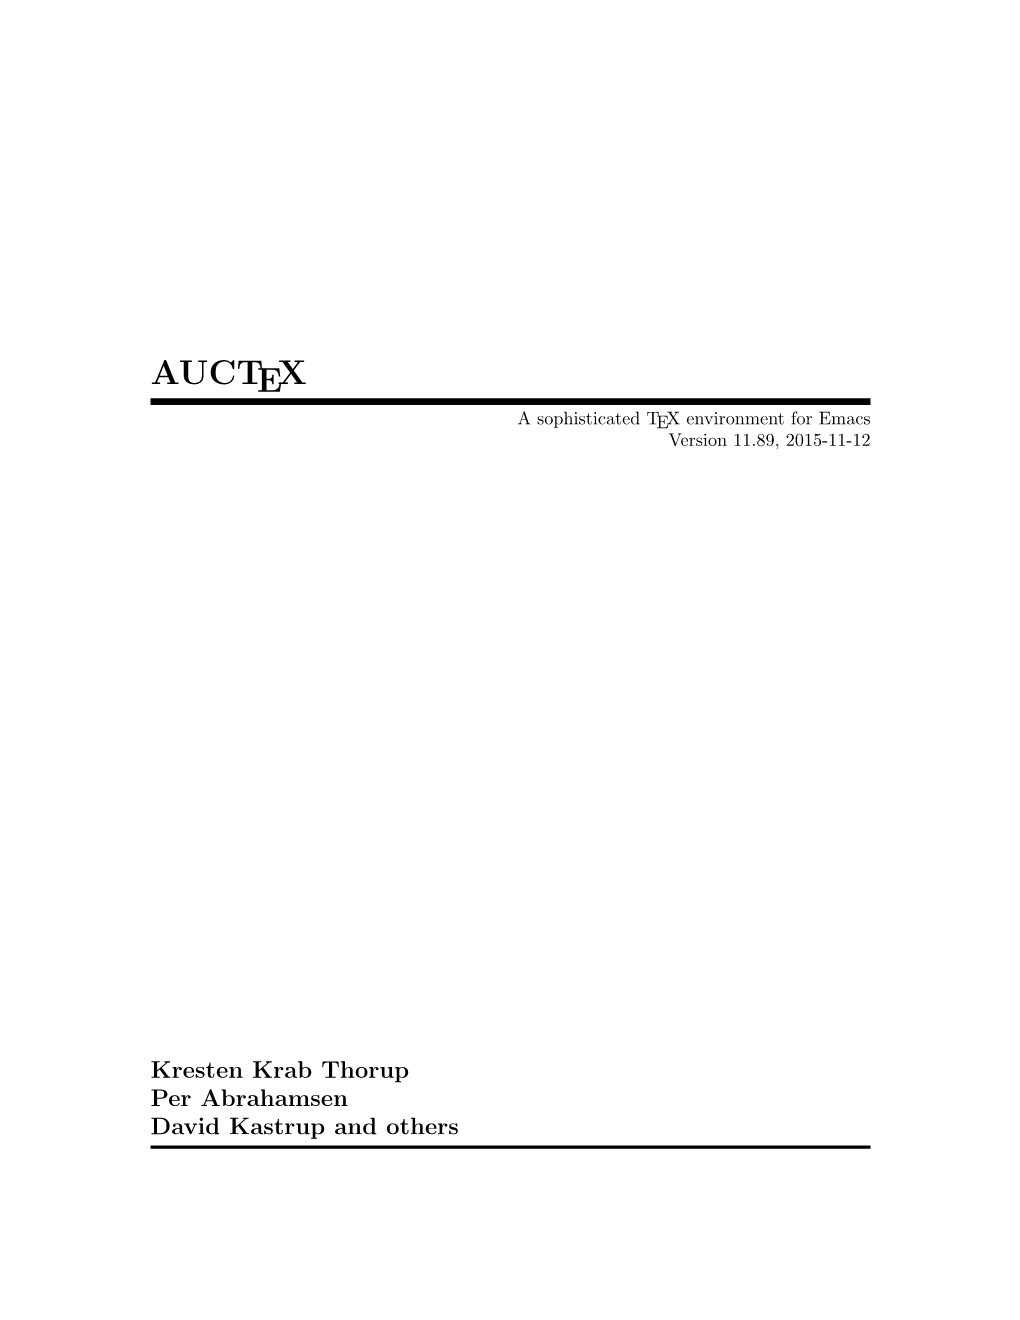 AUCTEX a Sophisticated TEX Environment for Emacs Version 11.89, 2015-11-12